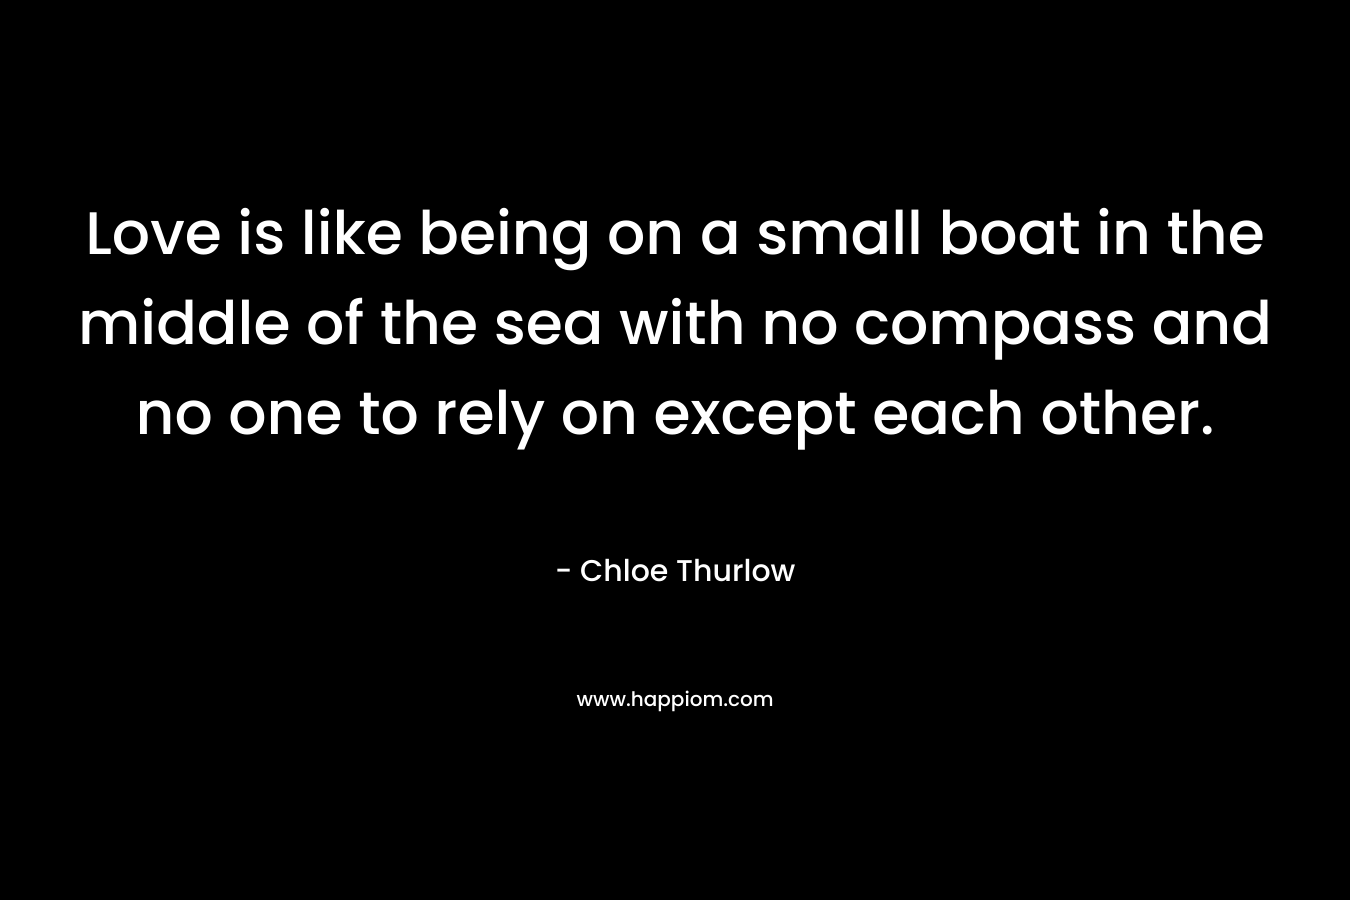 Love is like being on a small boat in the middle of the sea with no compass and no one to rely on except each other.